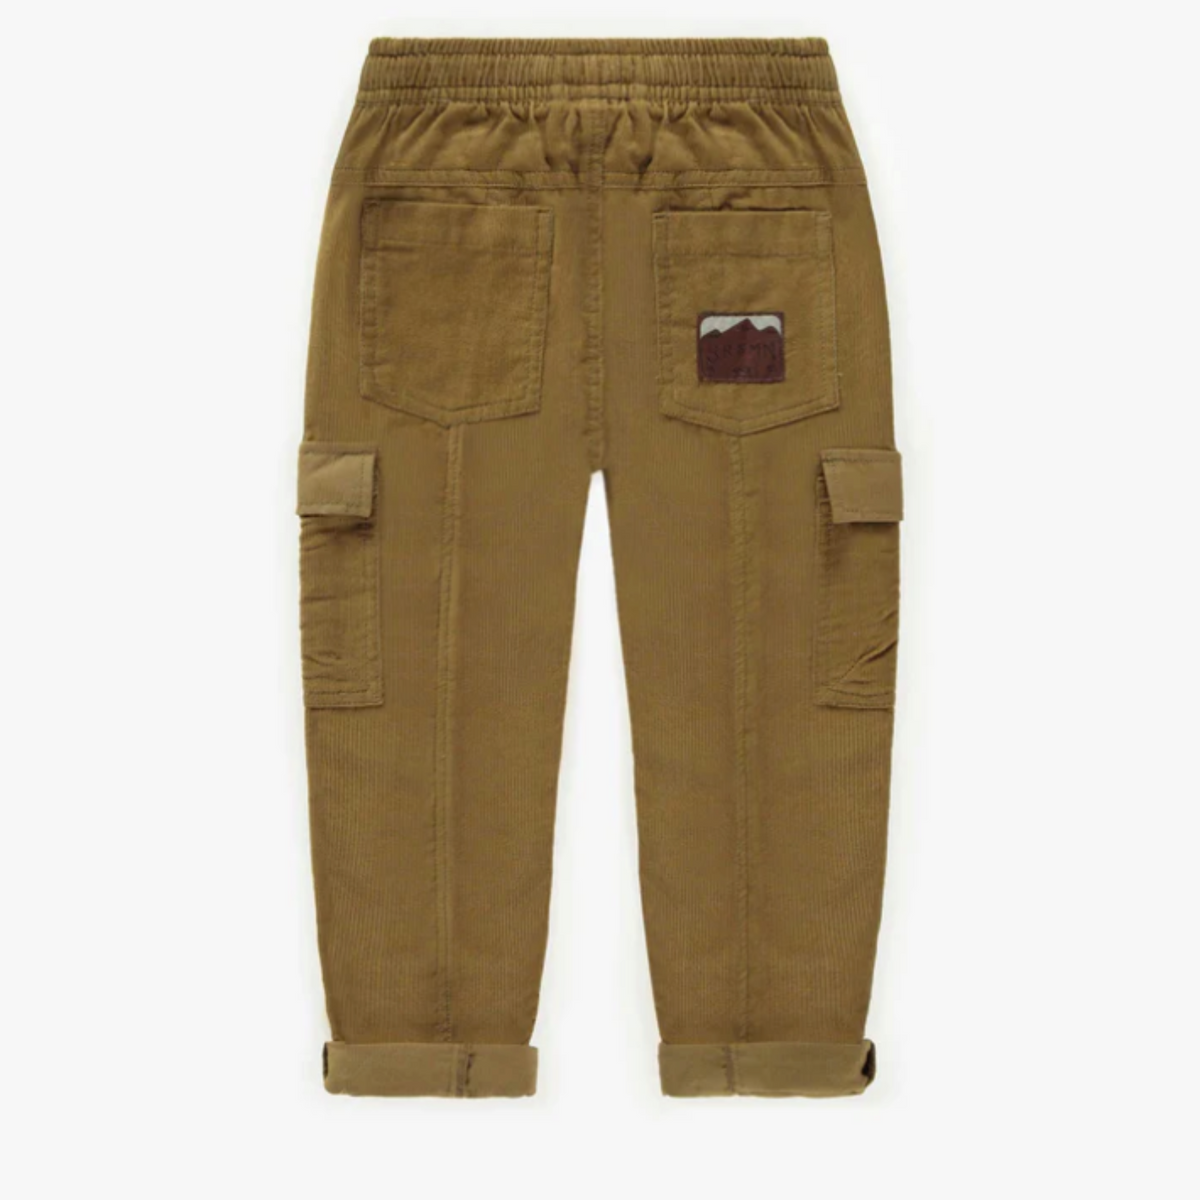 Curry Pants Relaxed Fit in Corduroy, Child